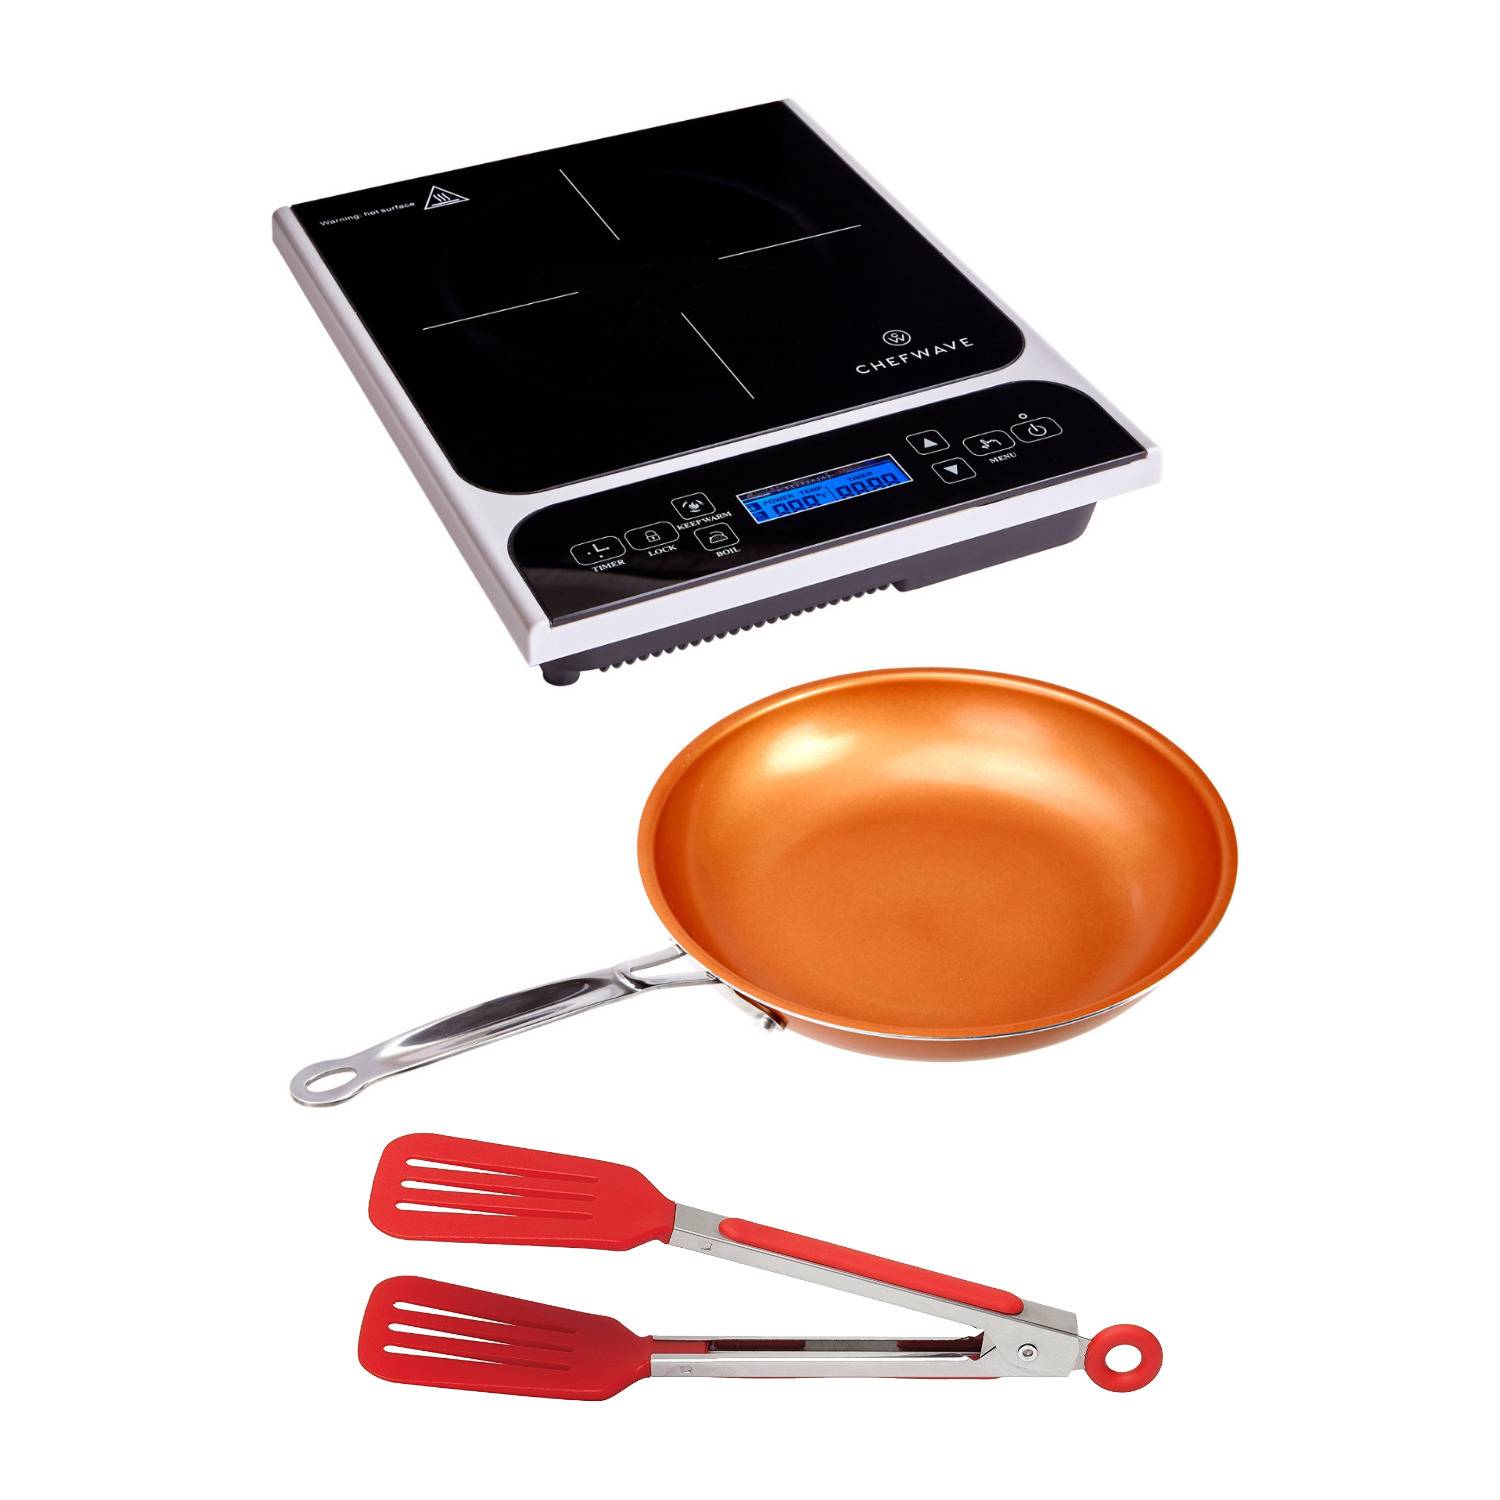 ChefWave LCD 1800W Portable Induction Cooktop Bundle with 10-Inch Fry Pan and 8-Inch Flipper Tongs